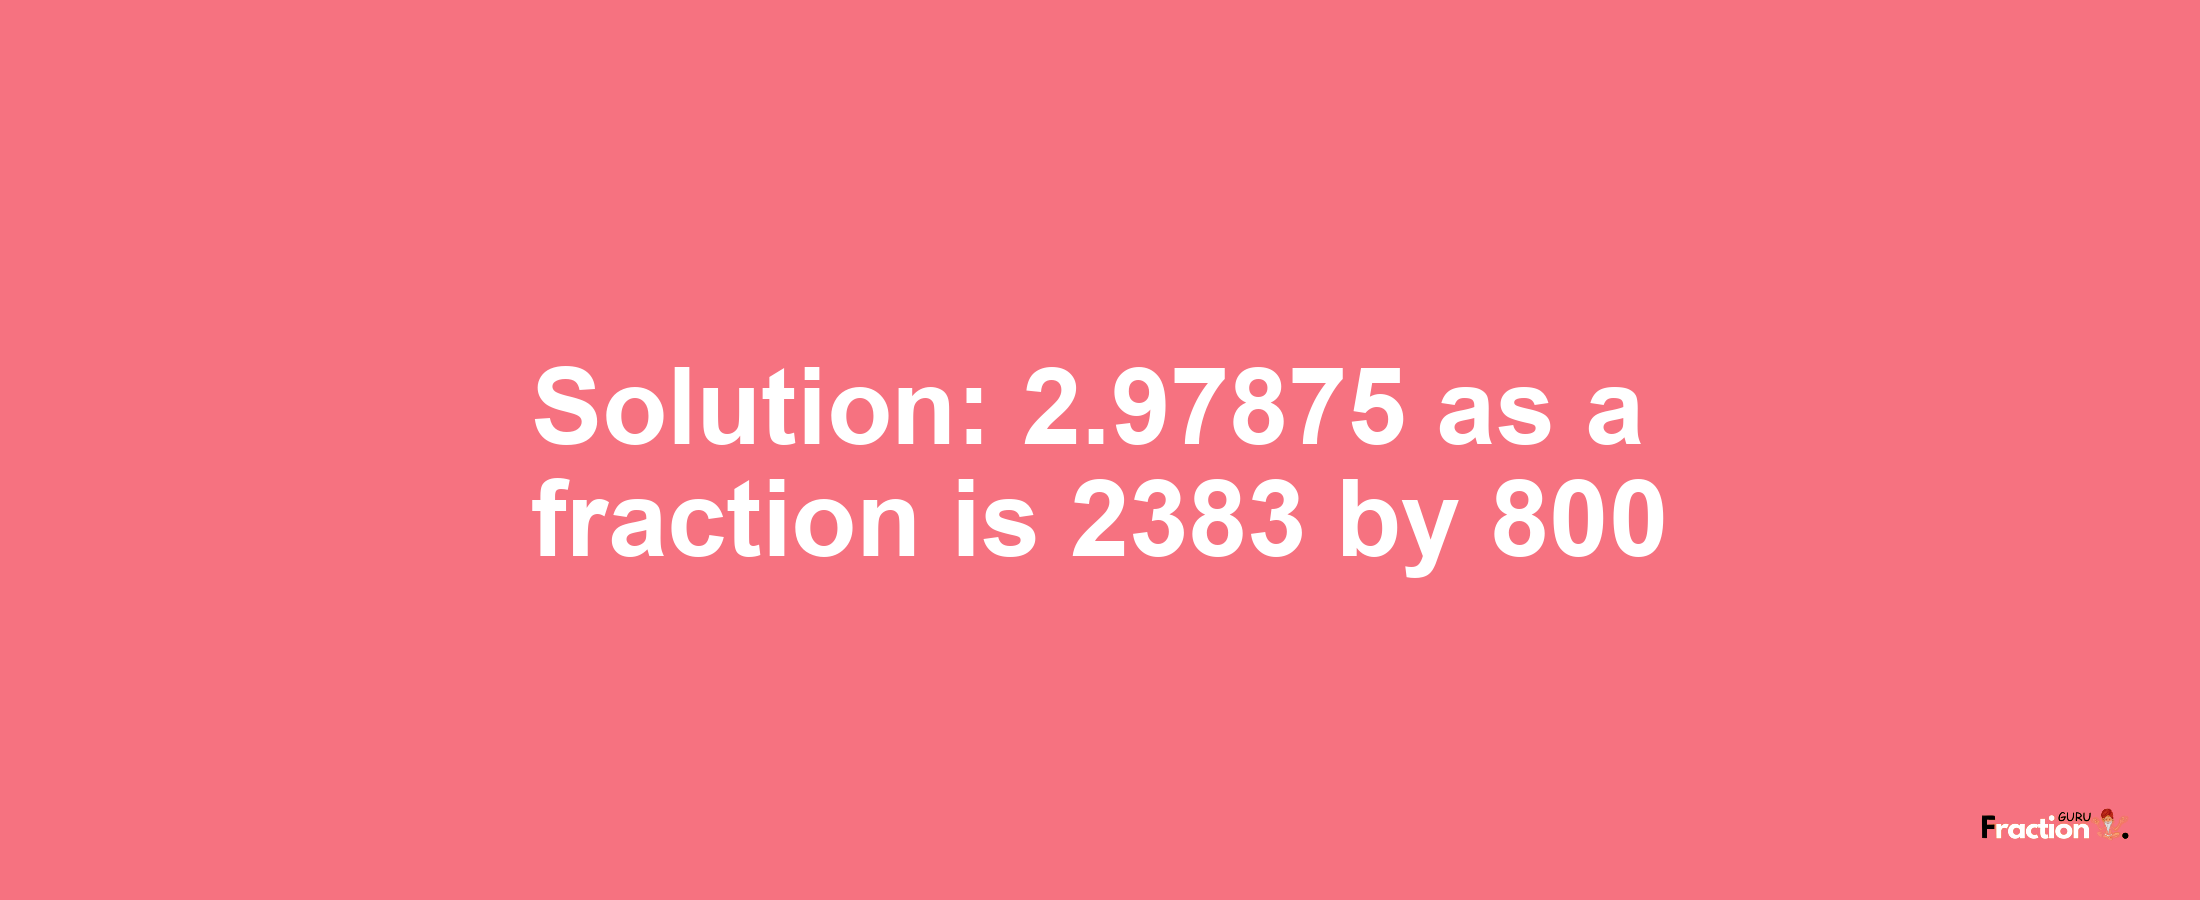 Solution:2.97875 as a fraction is 2383/800